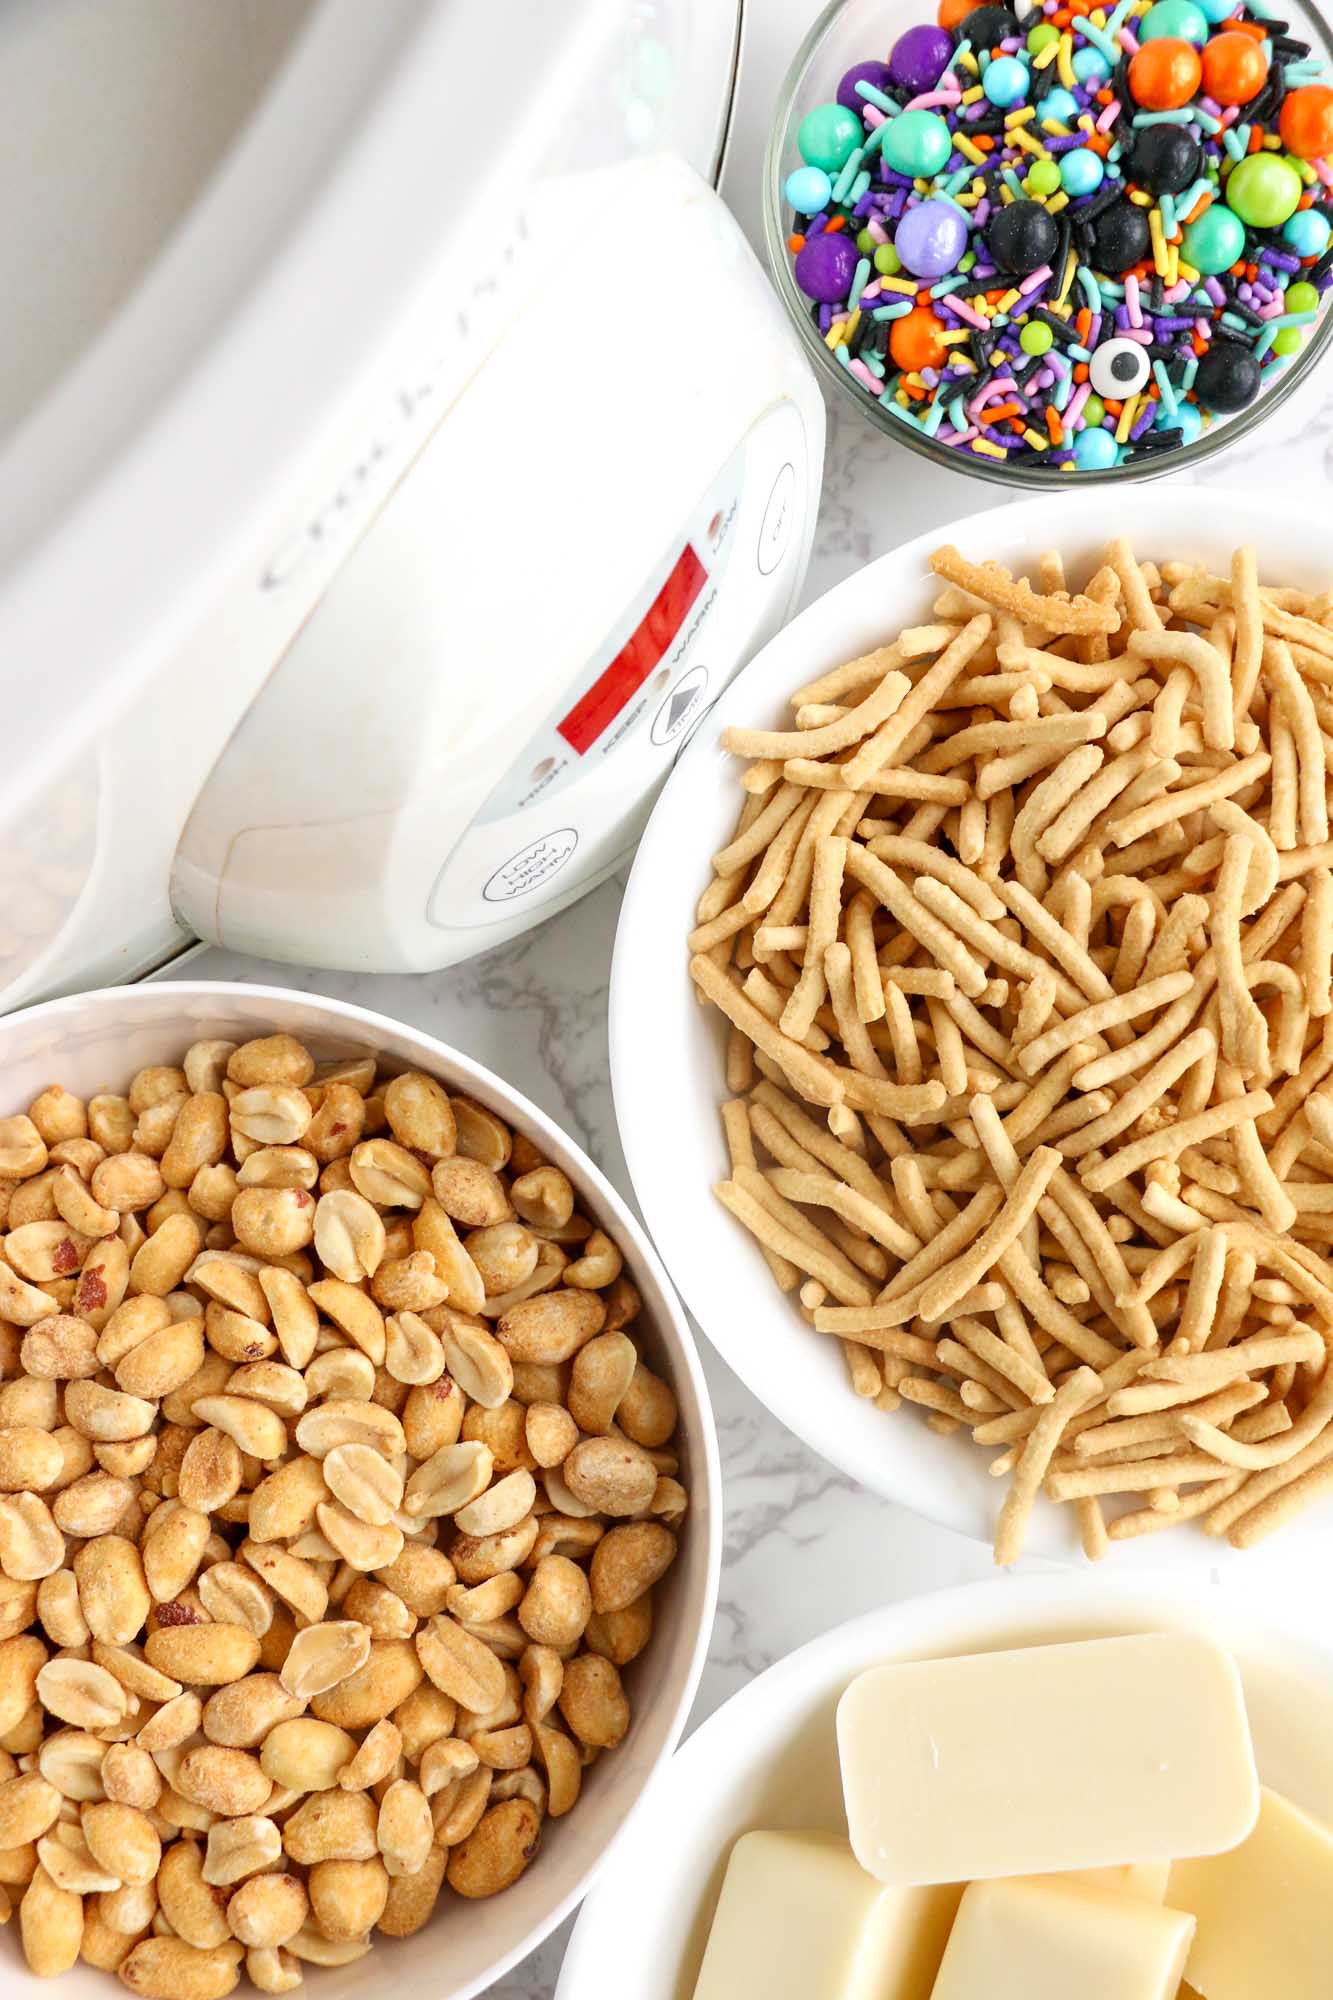 Ingredients needed to make halloween haystack cookies including chow mein noodles, roasted peanuts, white almond bark, and sprinkles.